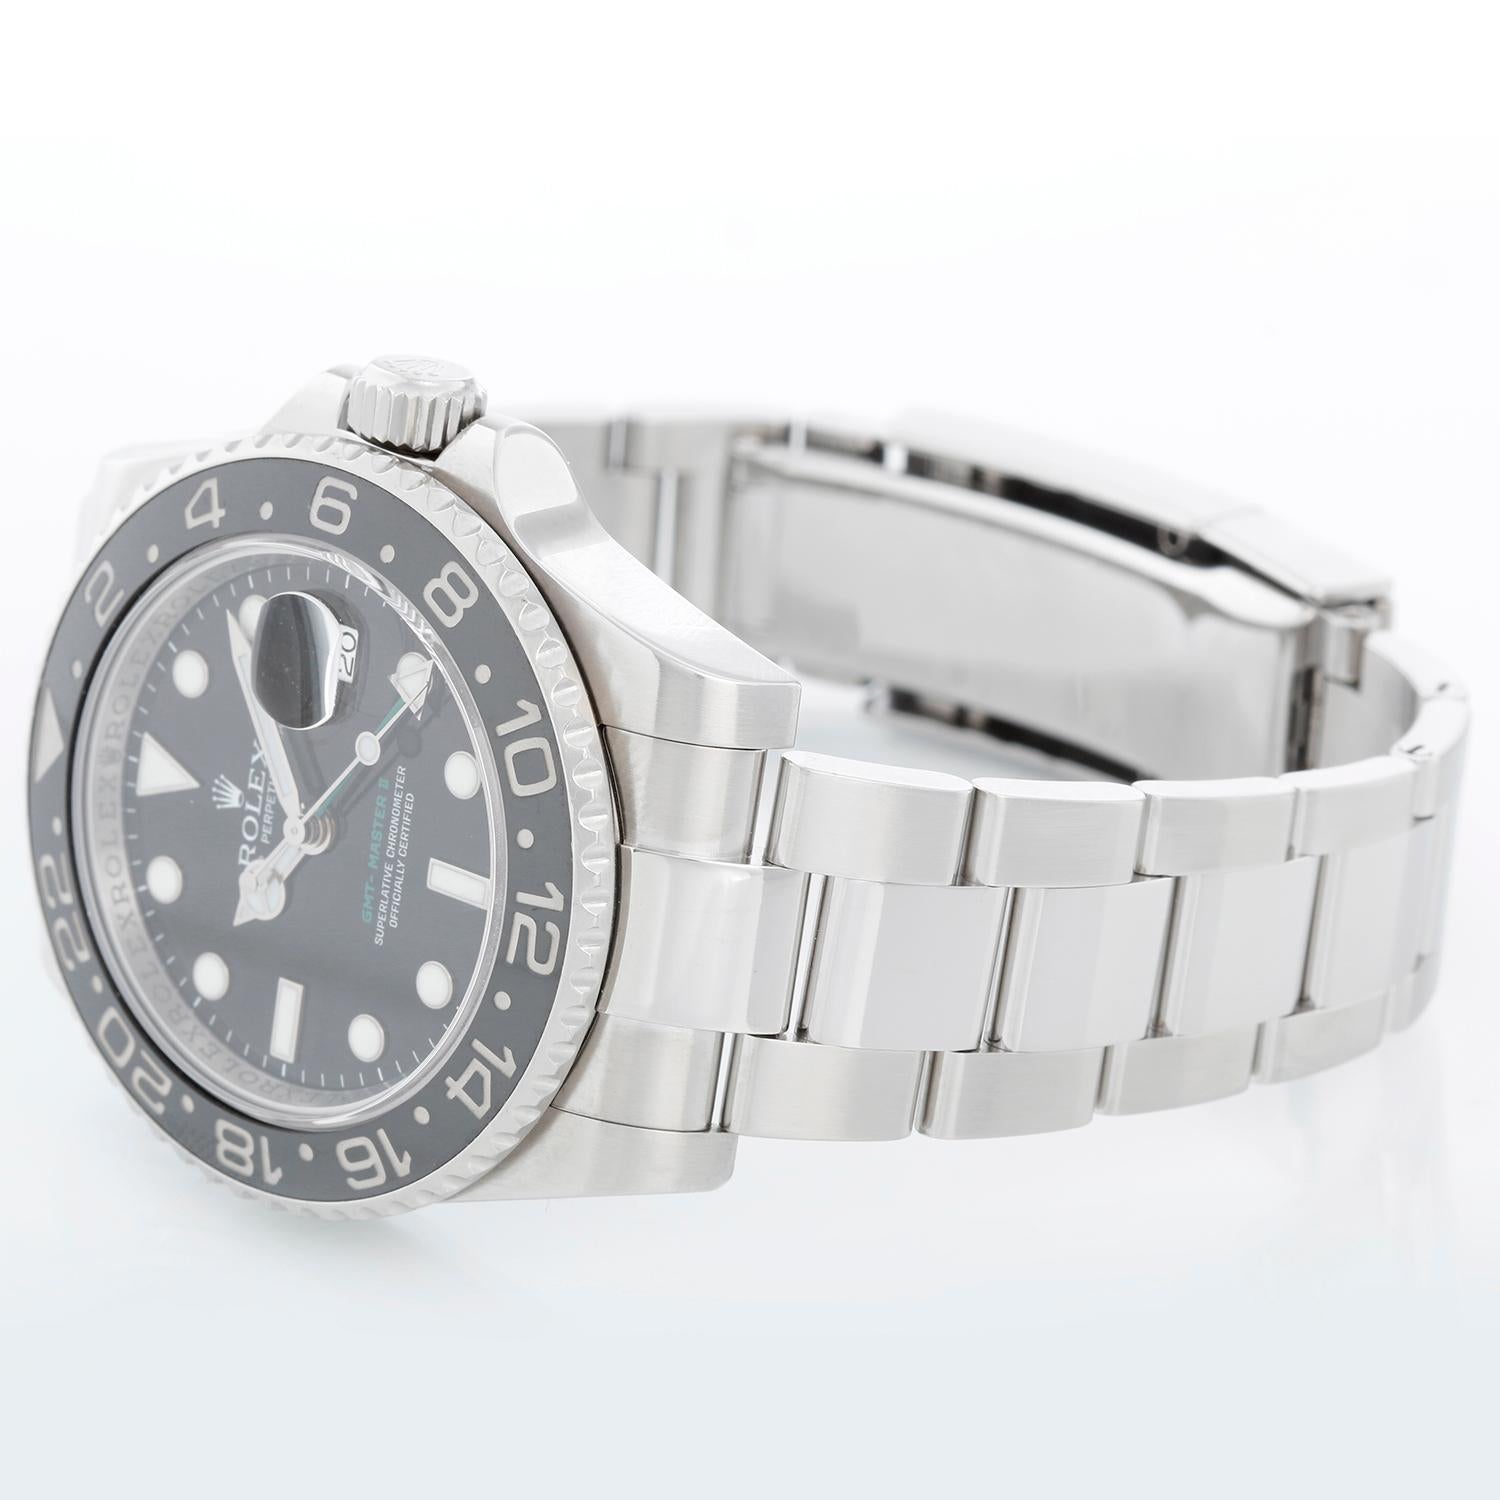 Men's Rolex GMT-Master II Watch Ceramic Bezel 116710 (116710N) - Automatic winding, 31 jewels. Stainless steel case with 24 hour ceramic bezel, engraved inside  (40mm diameter). Black dial with luminous markers; green GMT hand. Stainless steel